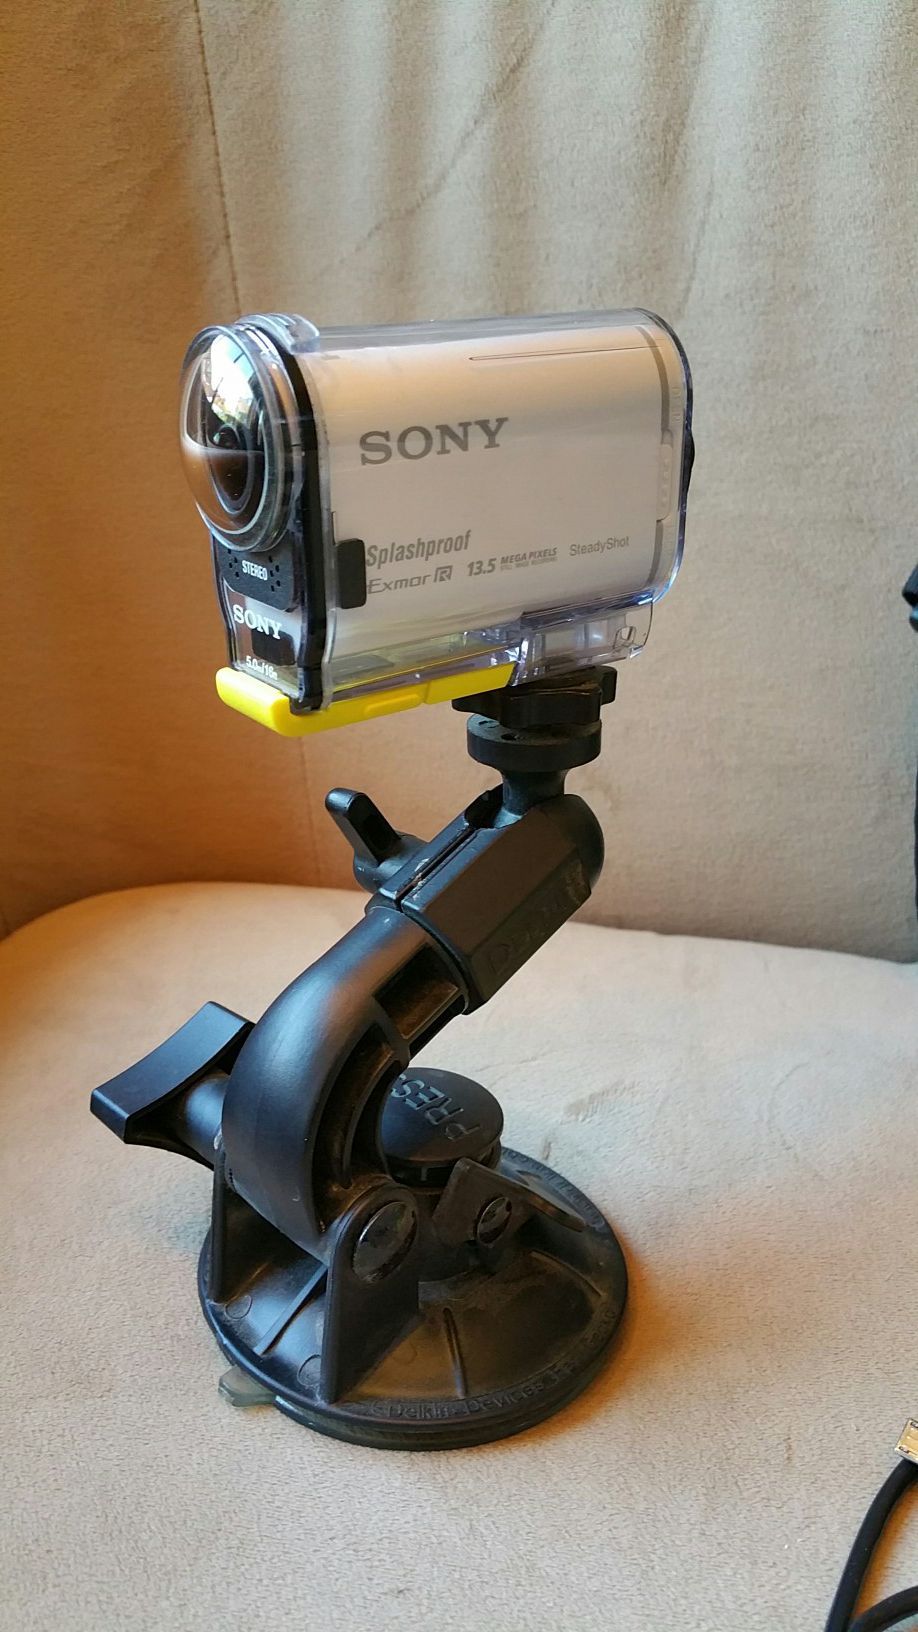 Sony action camera HDR-AS100V